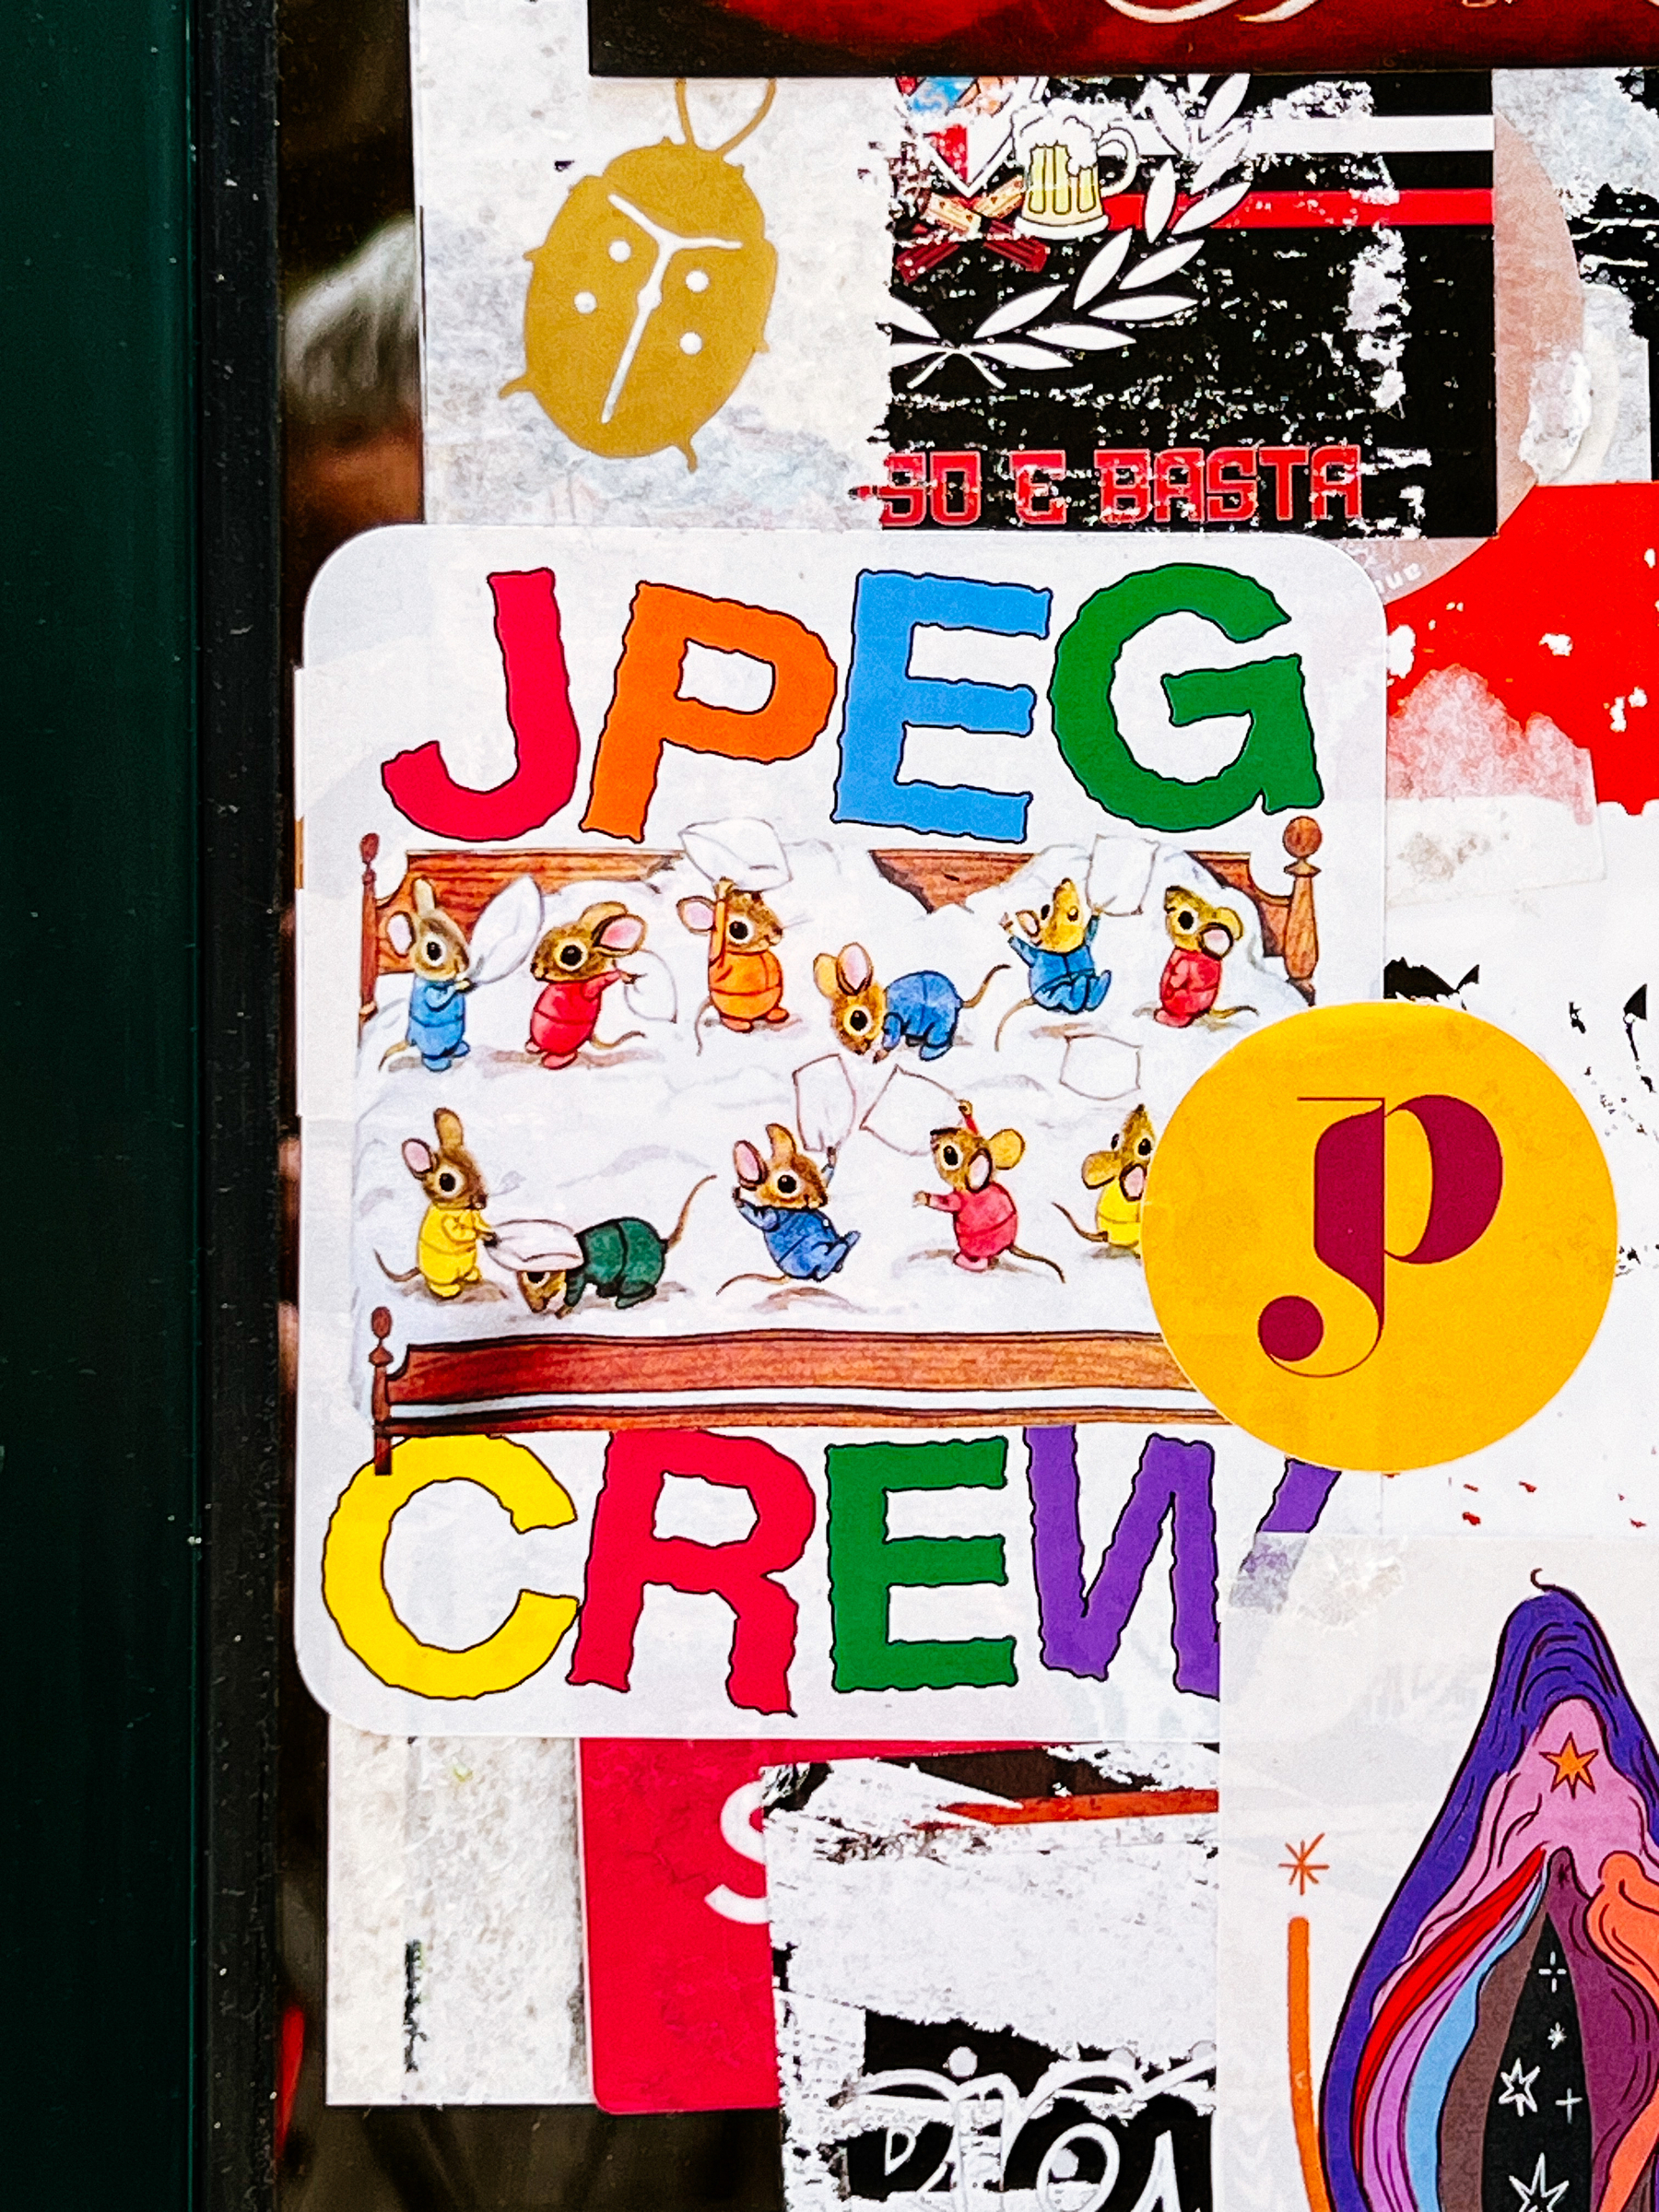 Sticker with a lot of tiny mice, and the words “JPEG CREW”. 